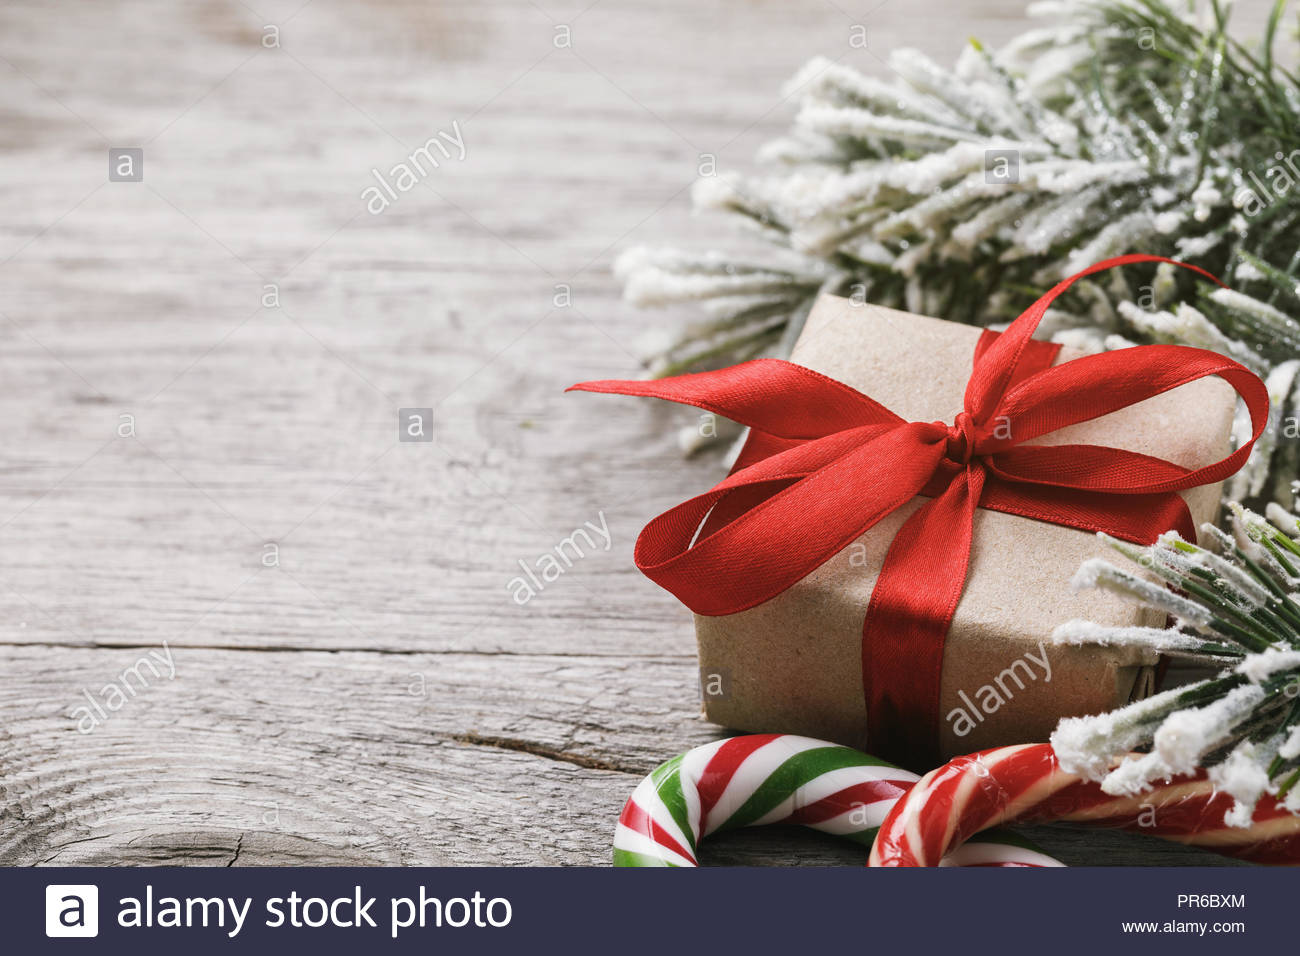 Christmas background and decorations on right side of wooden table